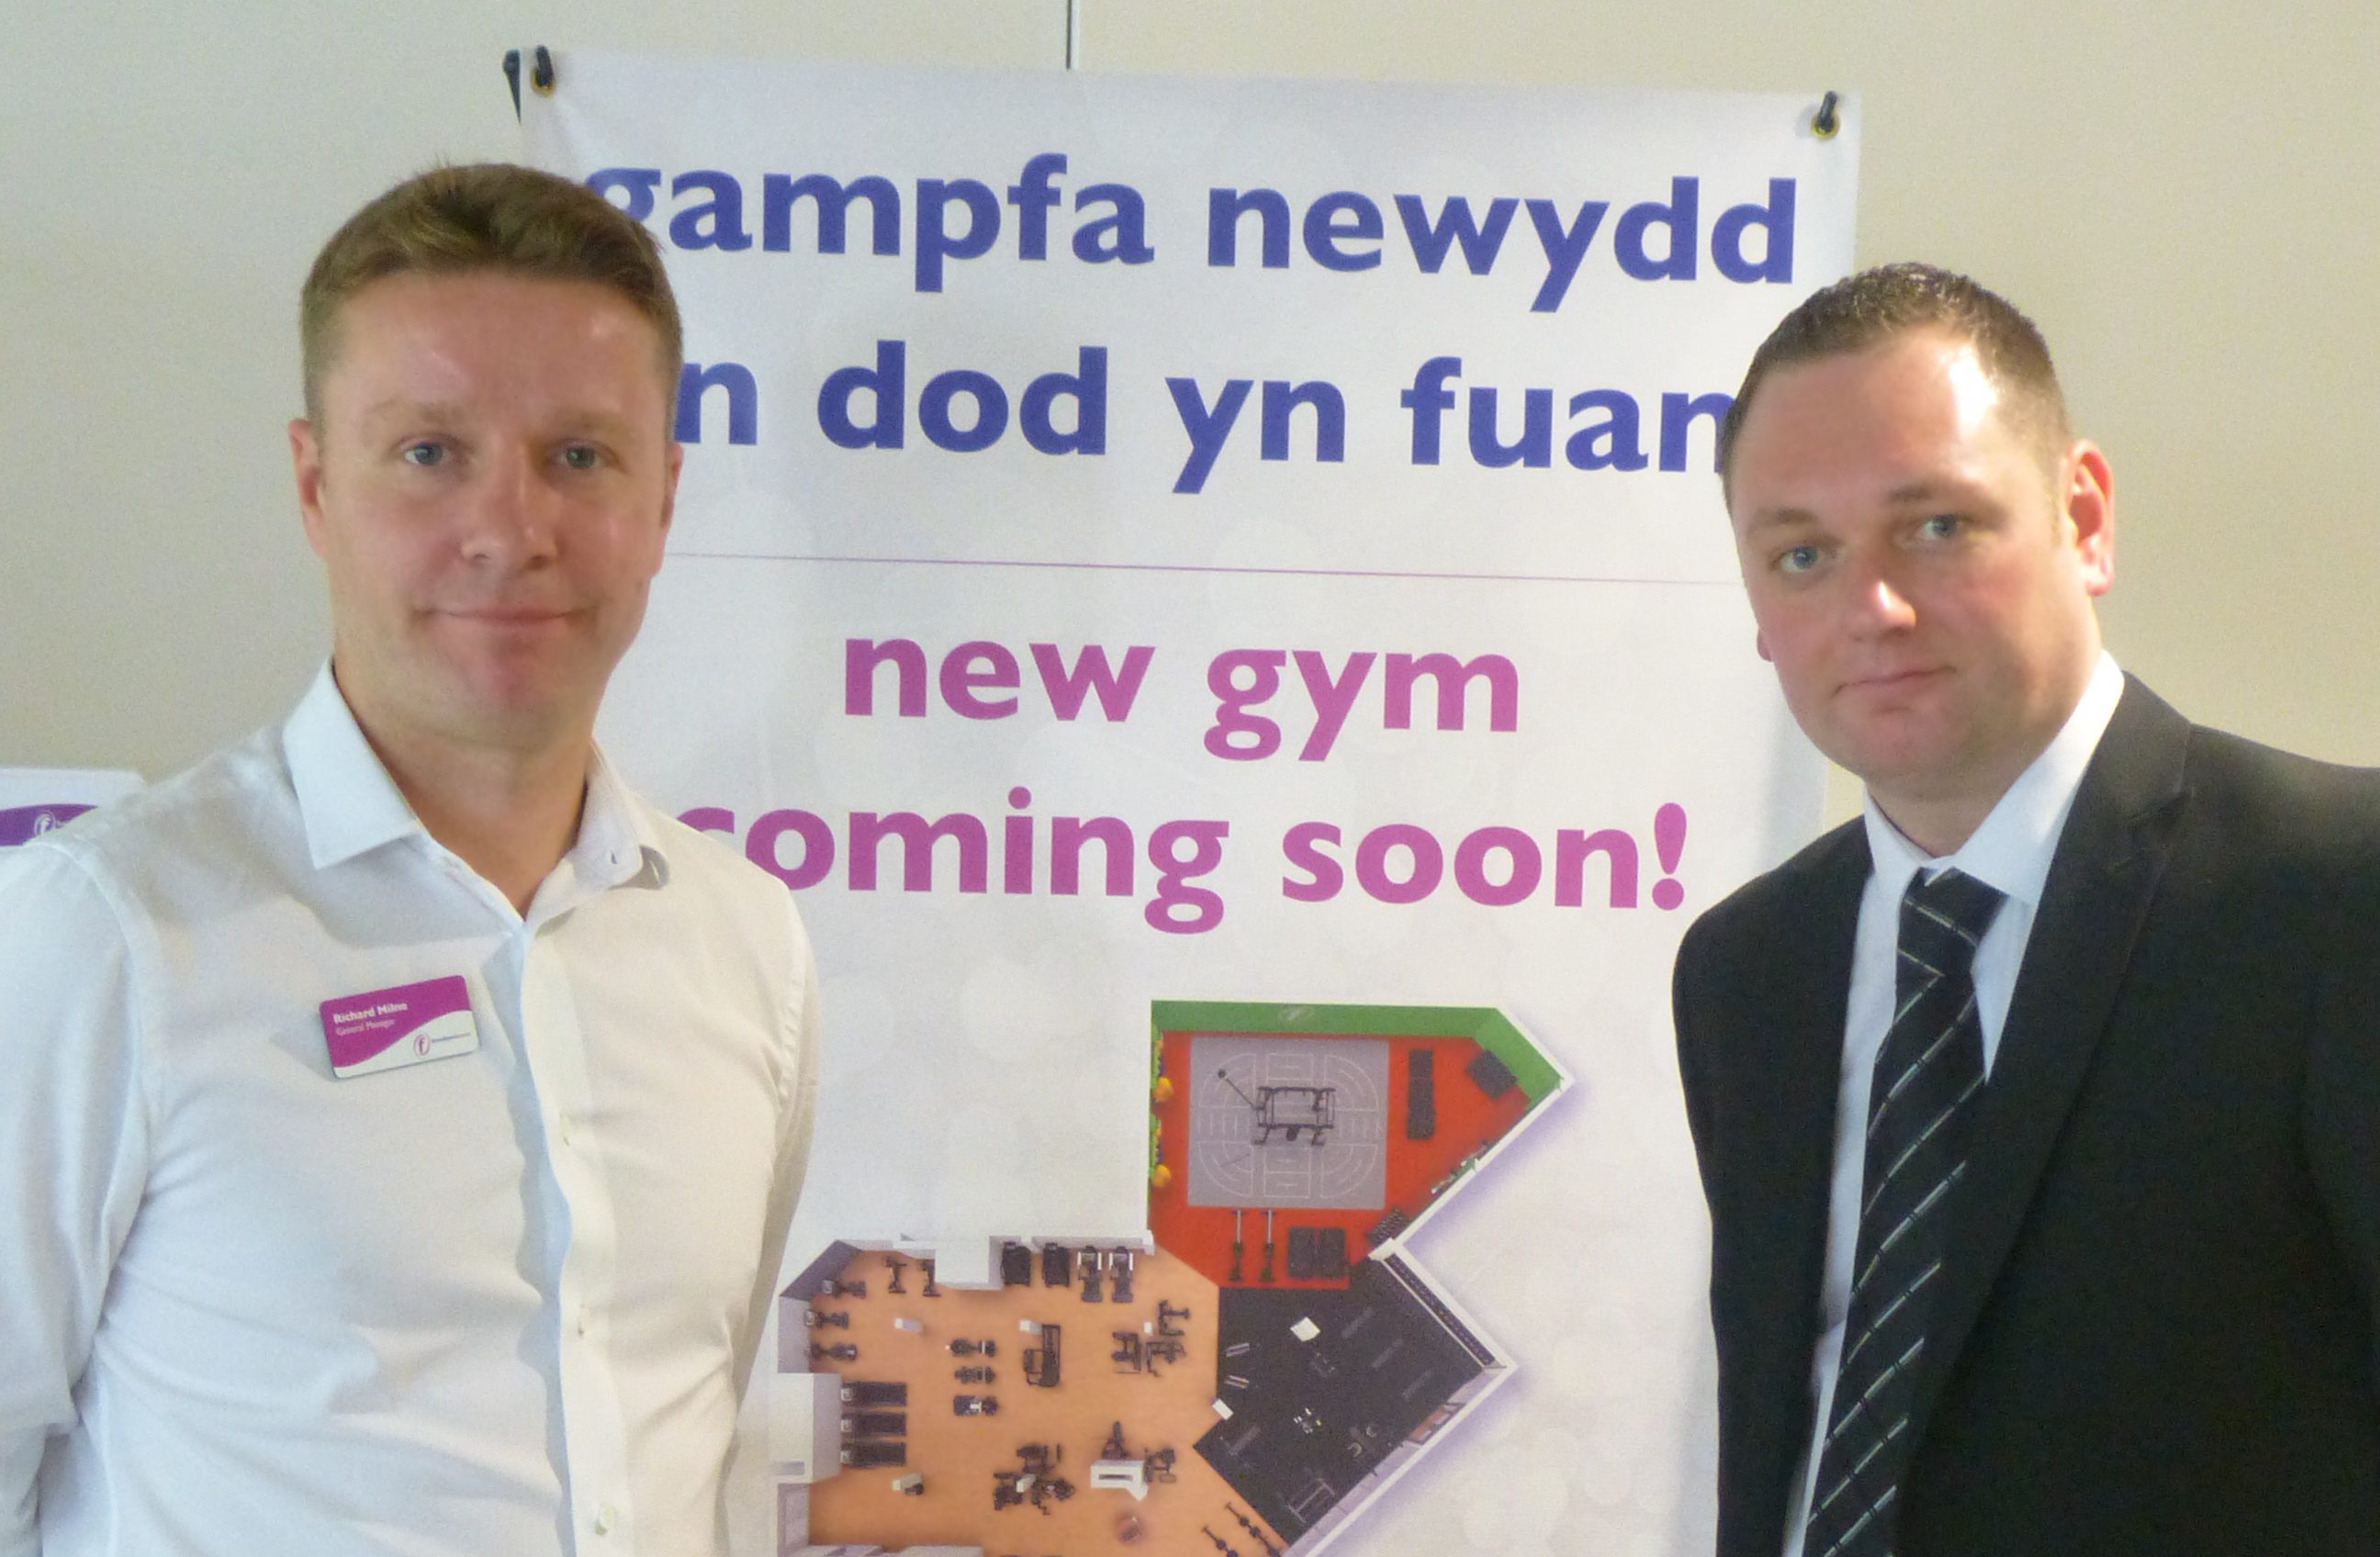 Do you use Waterworld? Find out more about changes to the leisure centre here